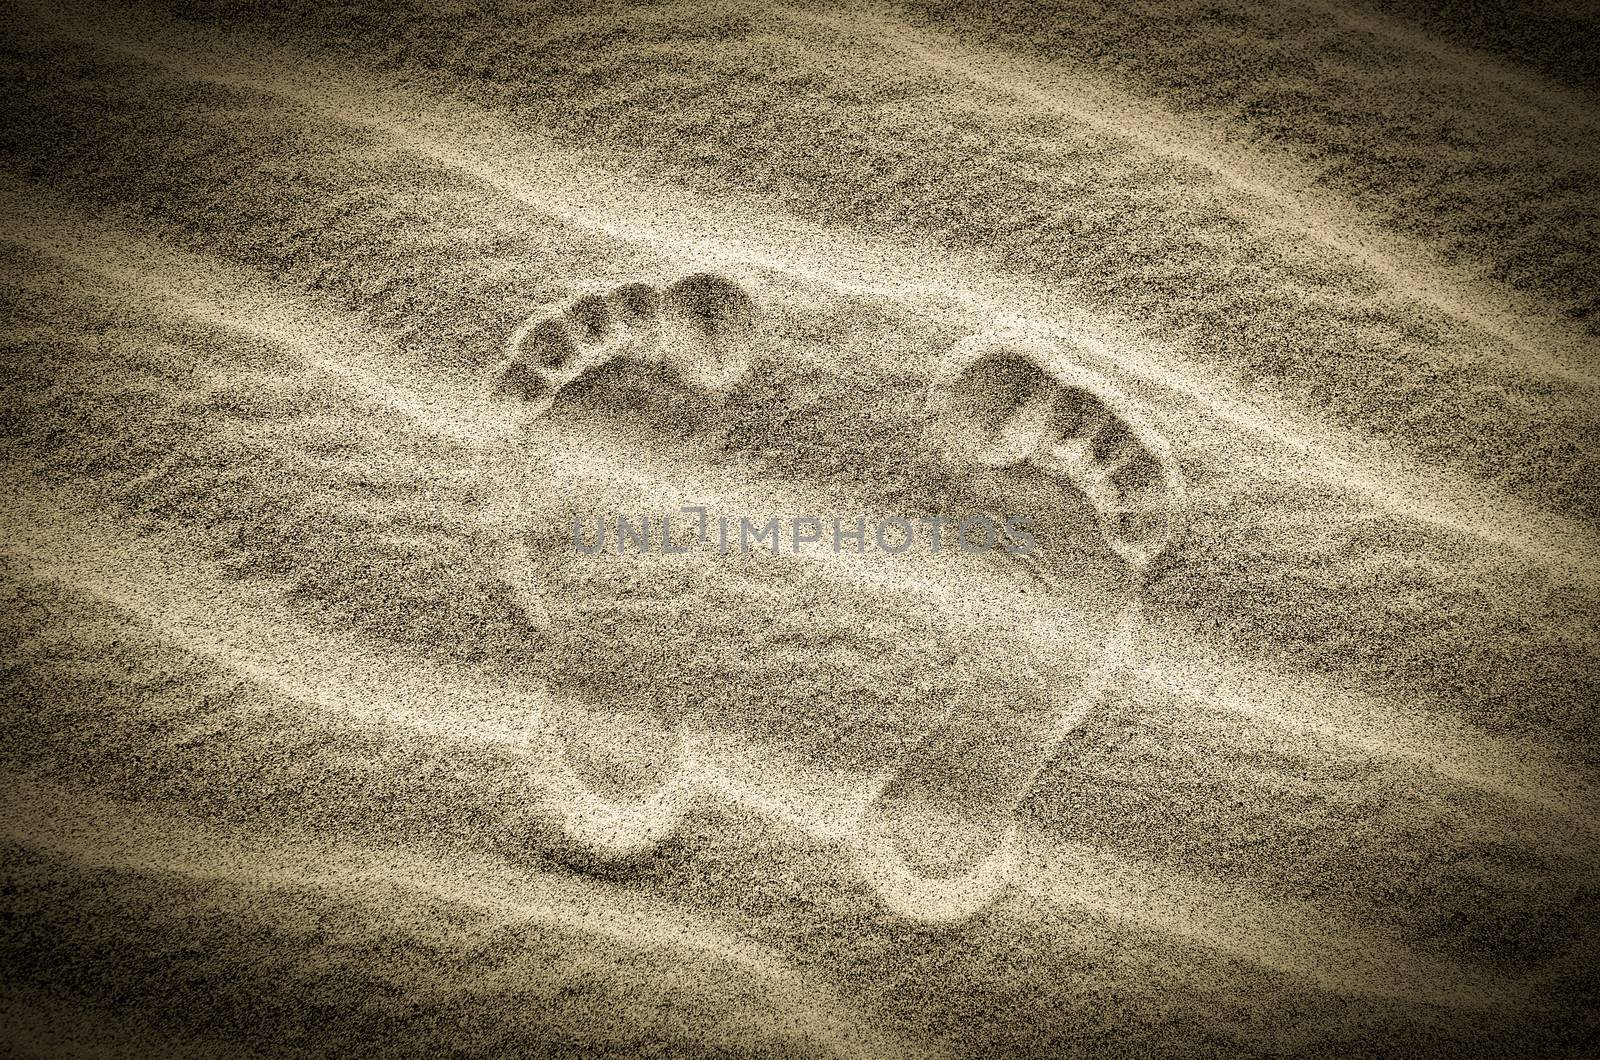 Two footprints in sand on the desert beach by martinm303